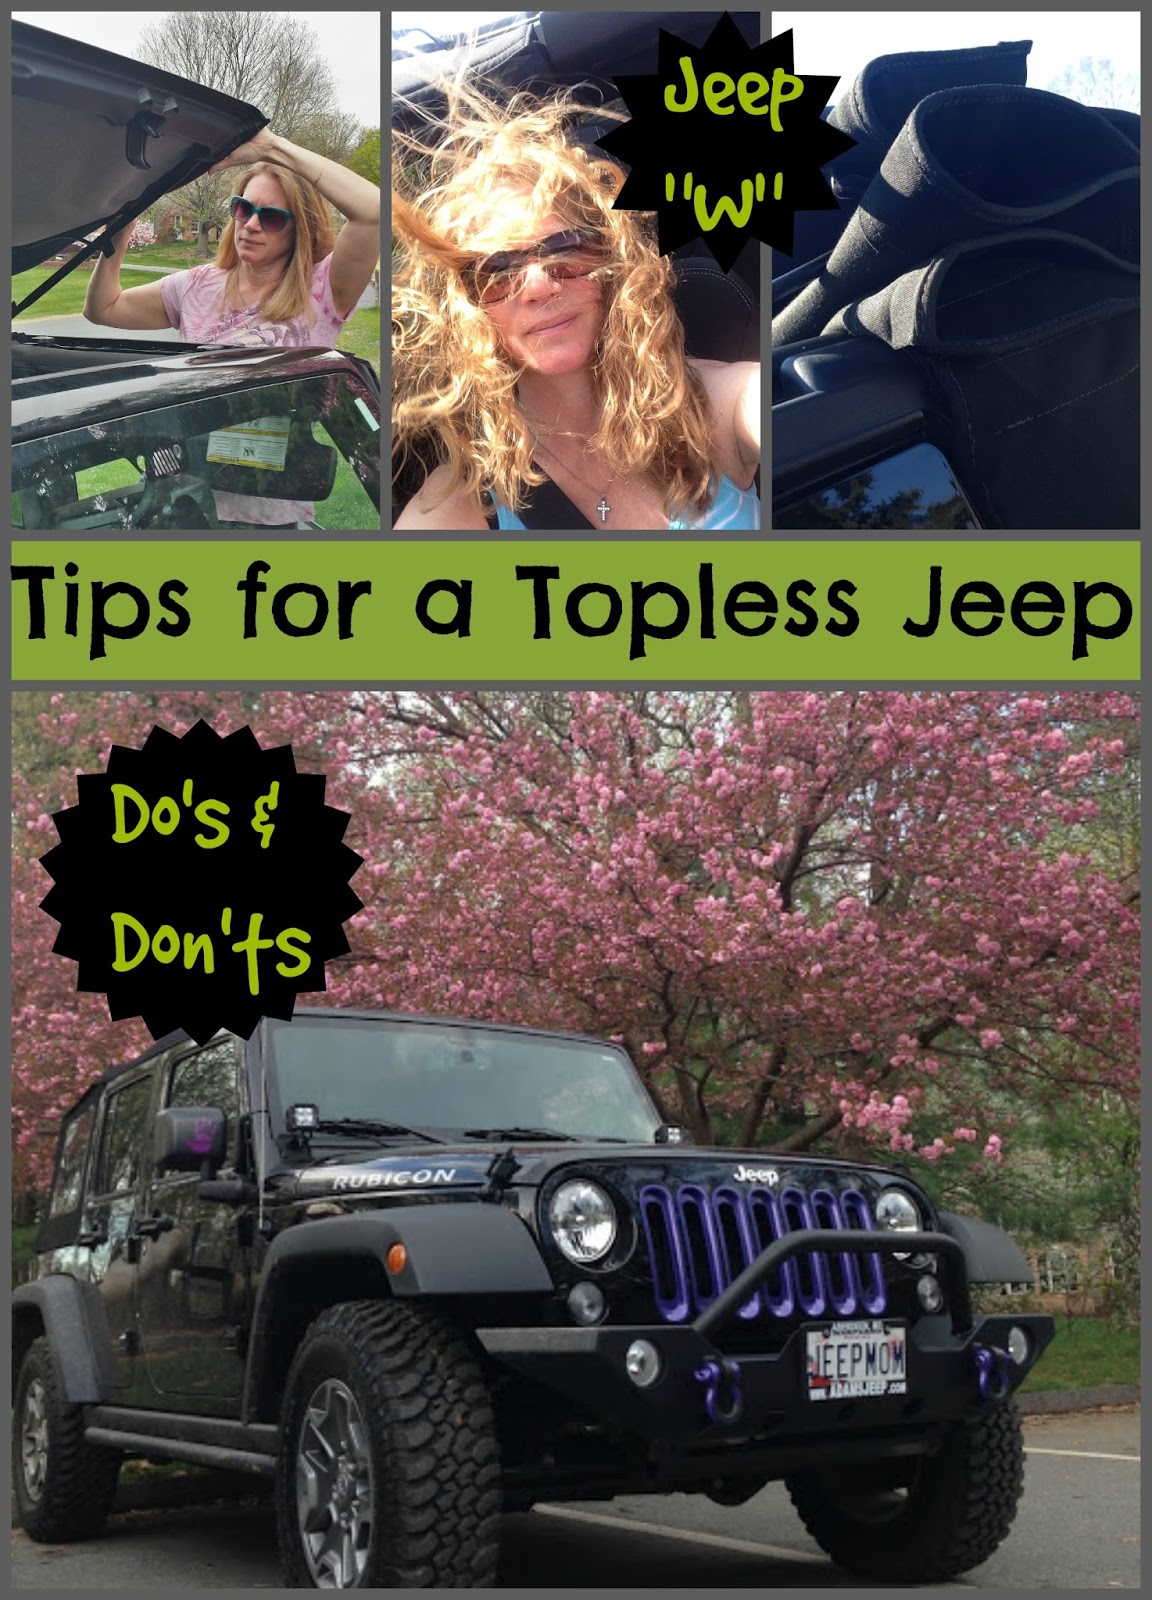 Topless Jeep Driving Do's & Don'ts